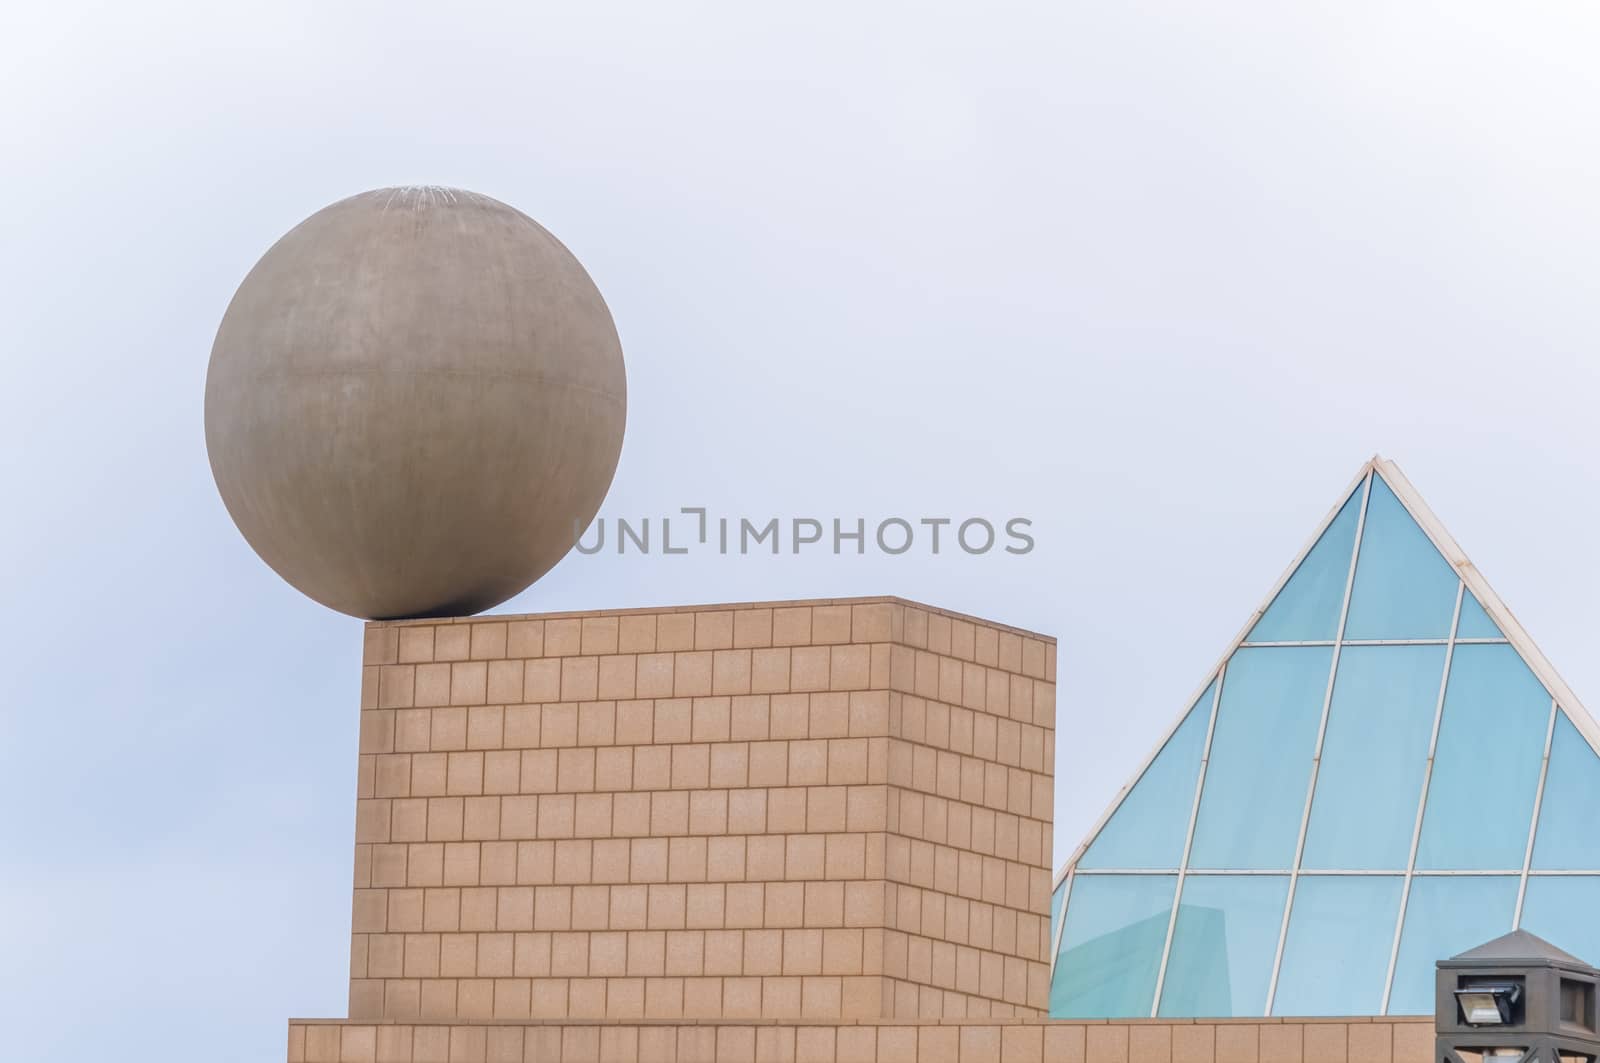  Gehry's Sphere Sculpture, Barcelona, Spain  by Marcus